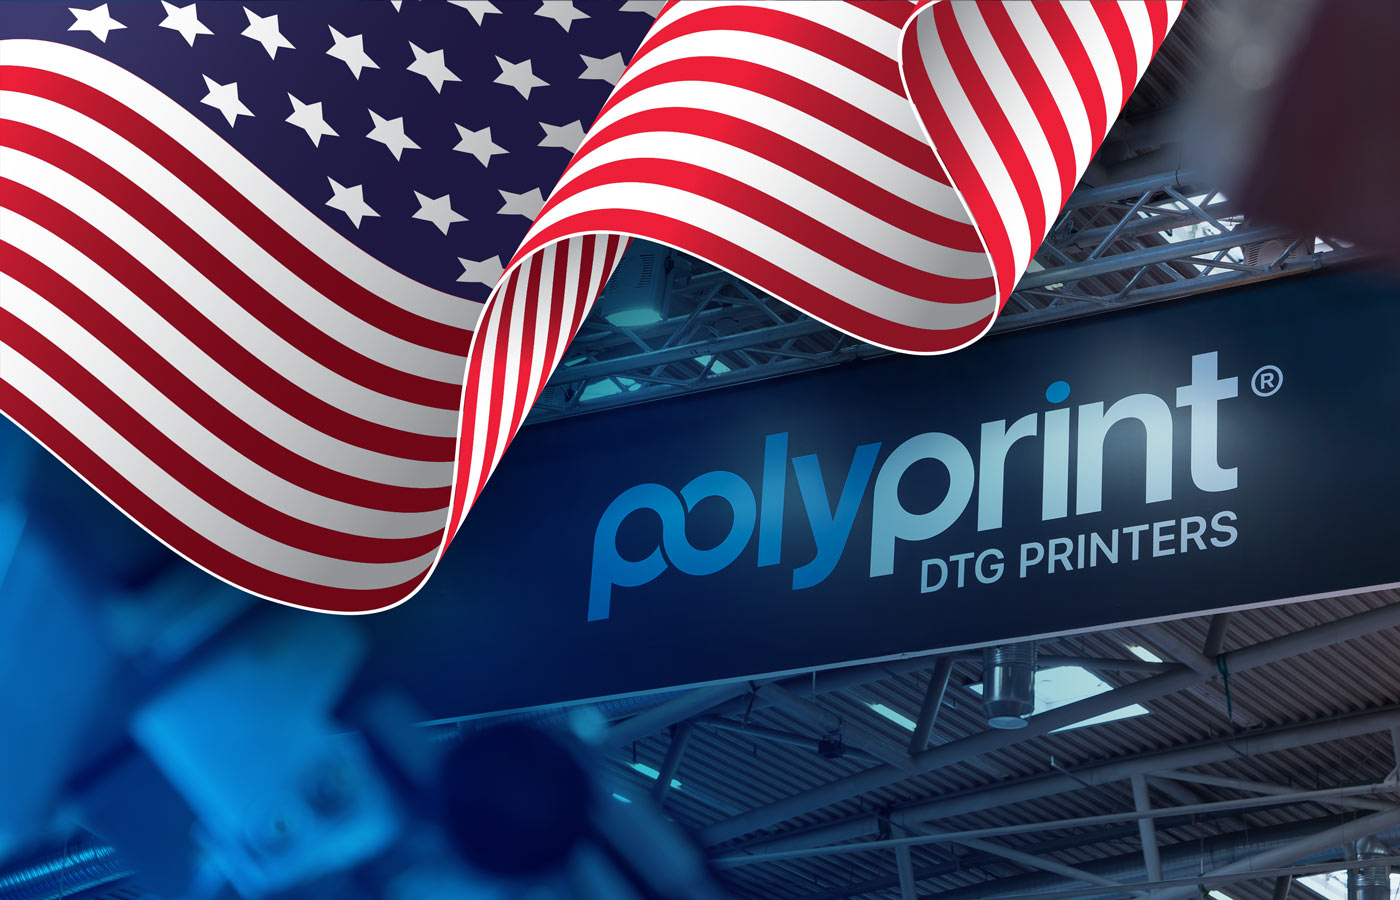 Polyprint establishes a subsidiary in the US. Launching Polyprint USA